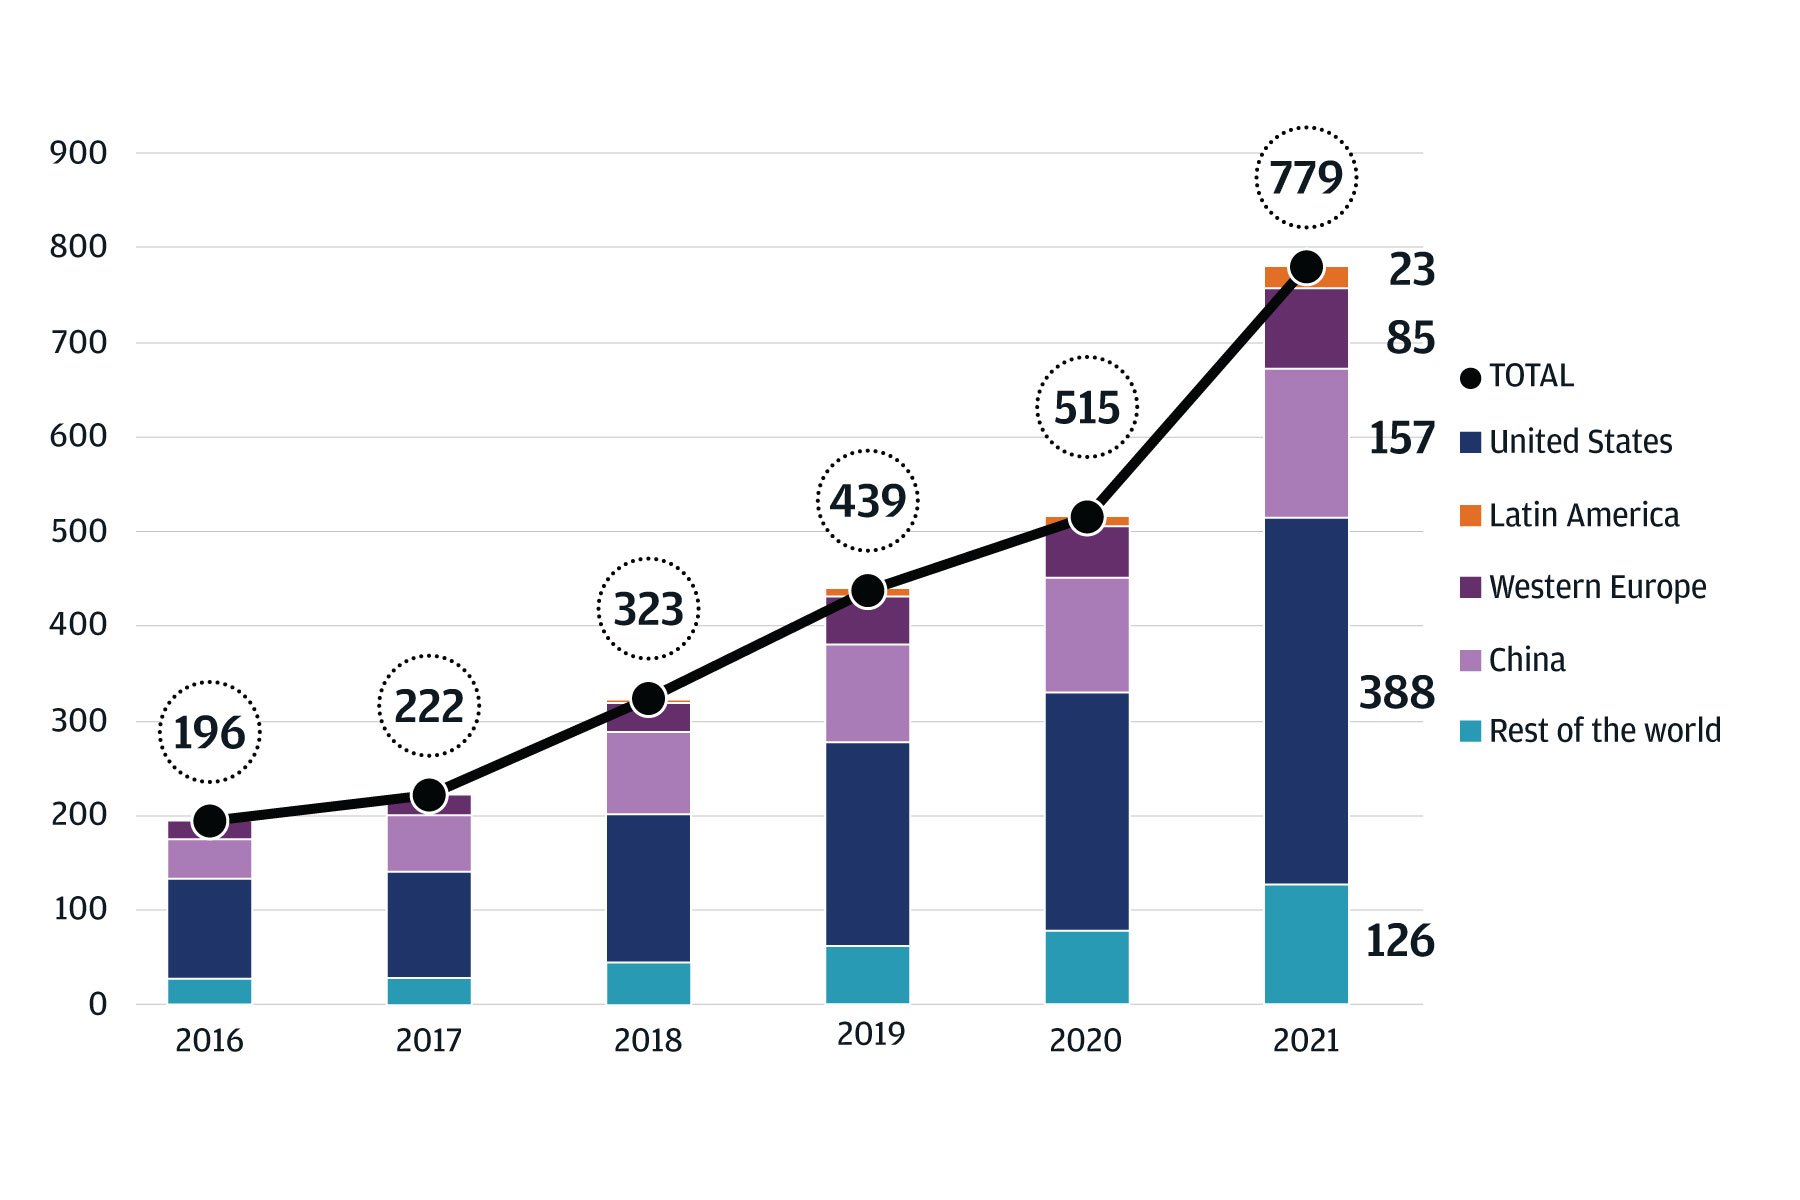 The graph shows the total number of unicorns worldwide, in the United States, in China and in Latin America for the period 2016-2020. In 2016 were identified 196 unicorns worldwide, up to 779 in 2021. 